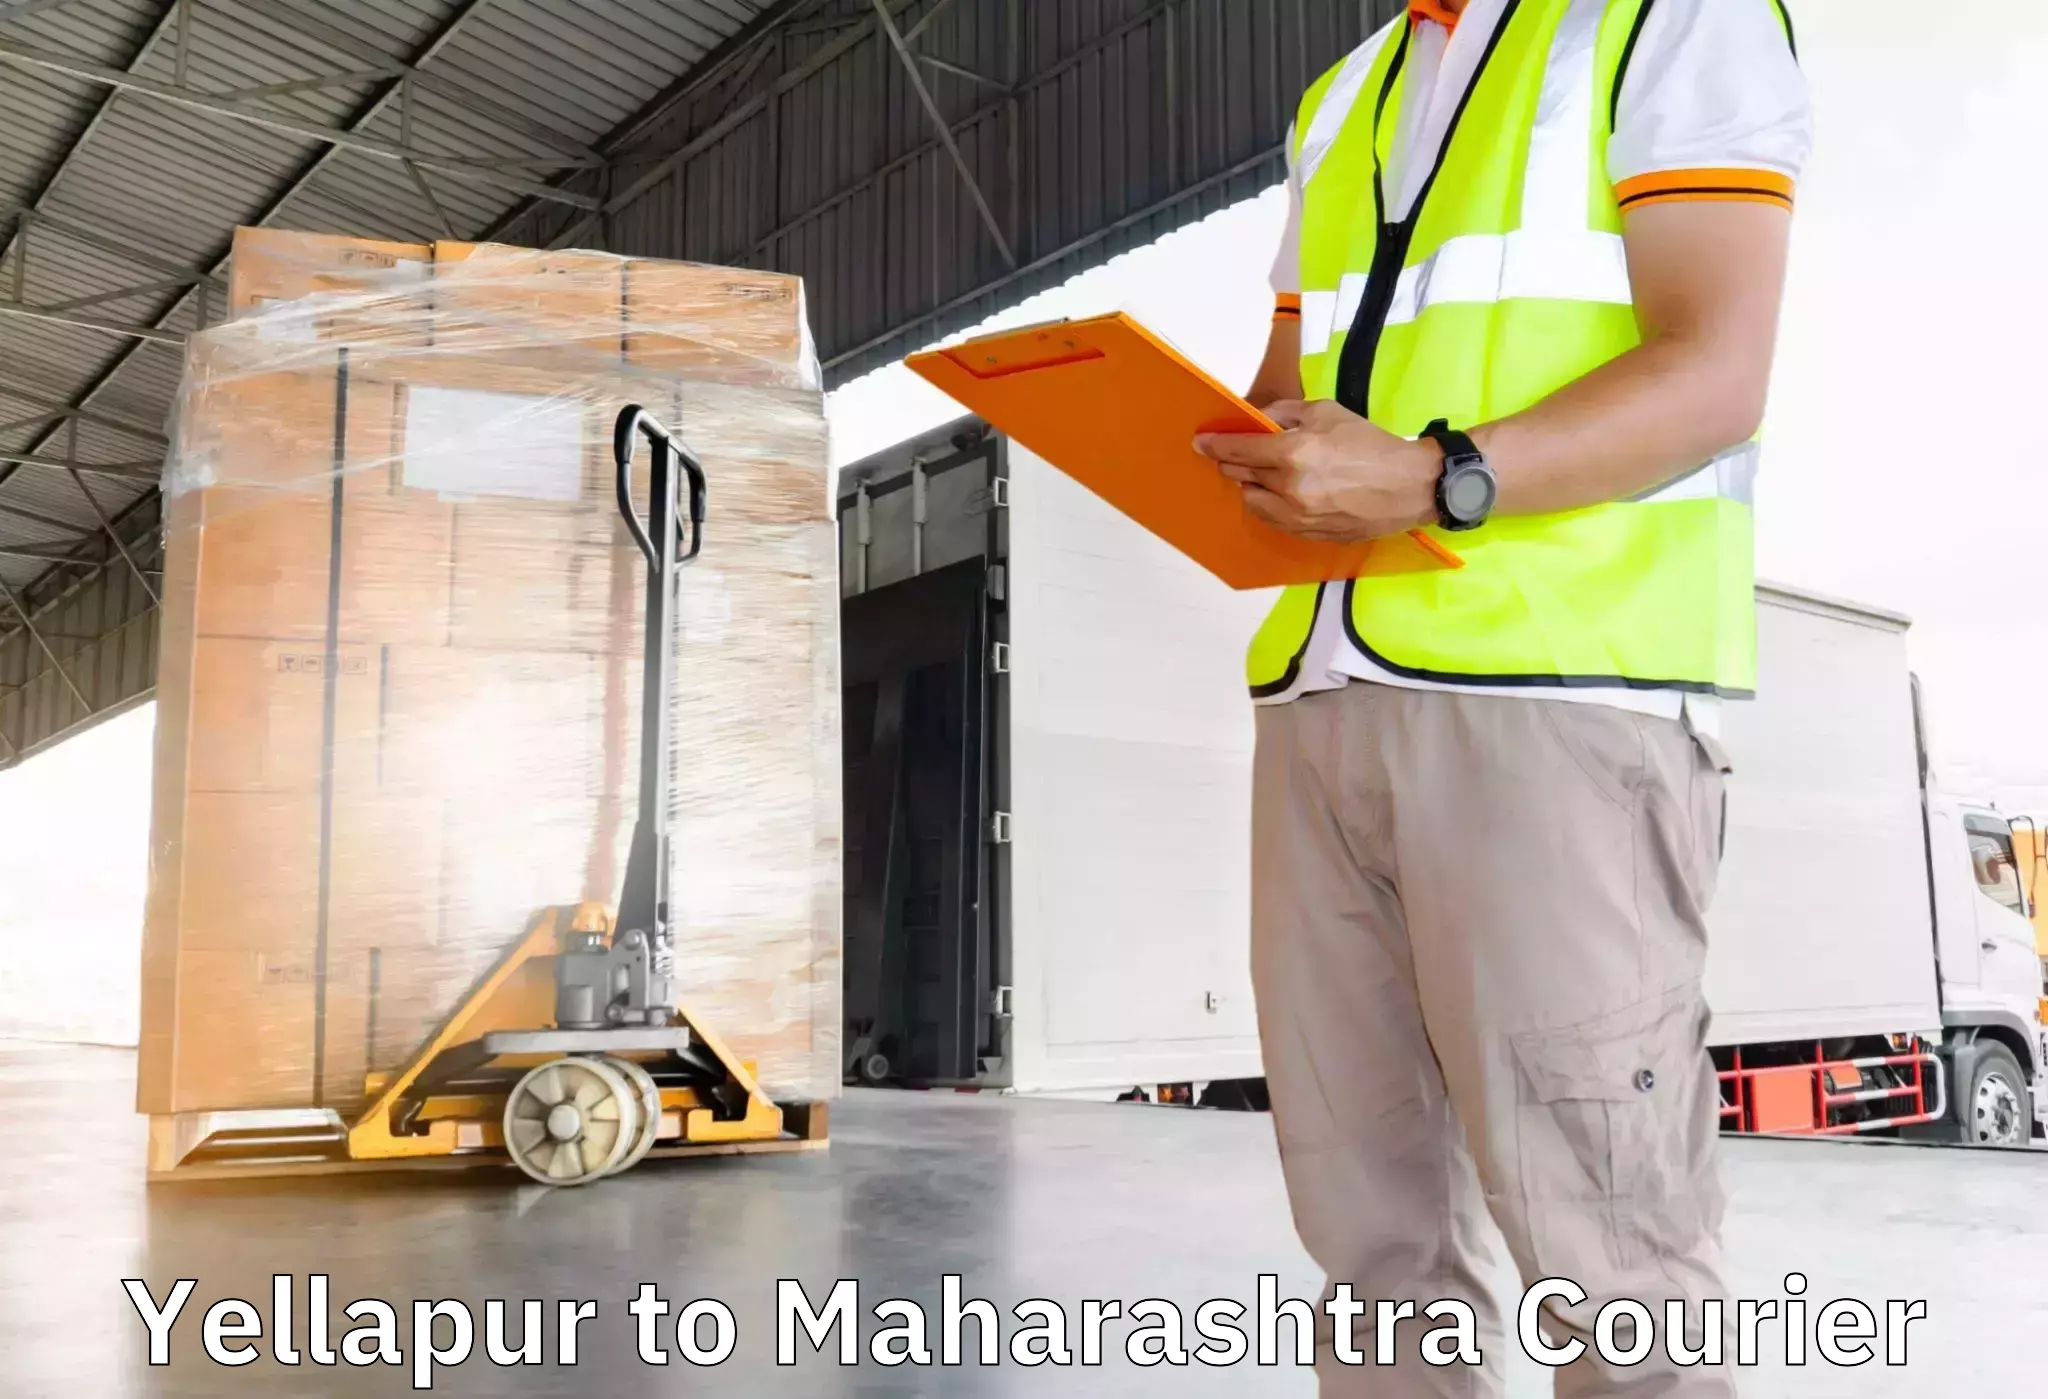 Furniture relocation services in Yellapur to Nagpur